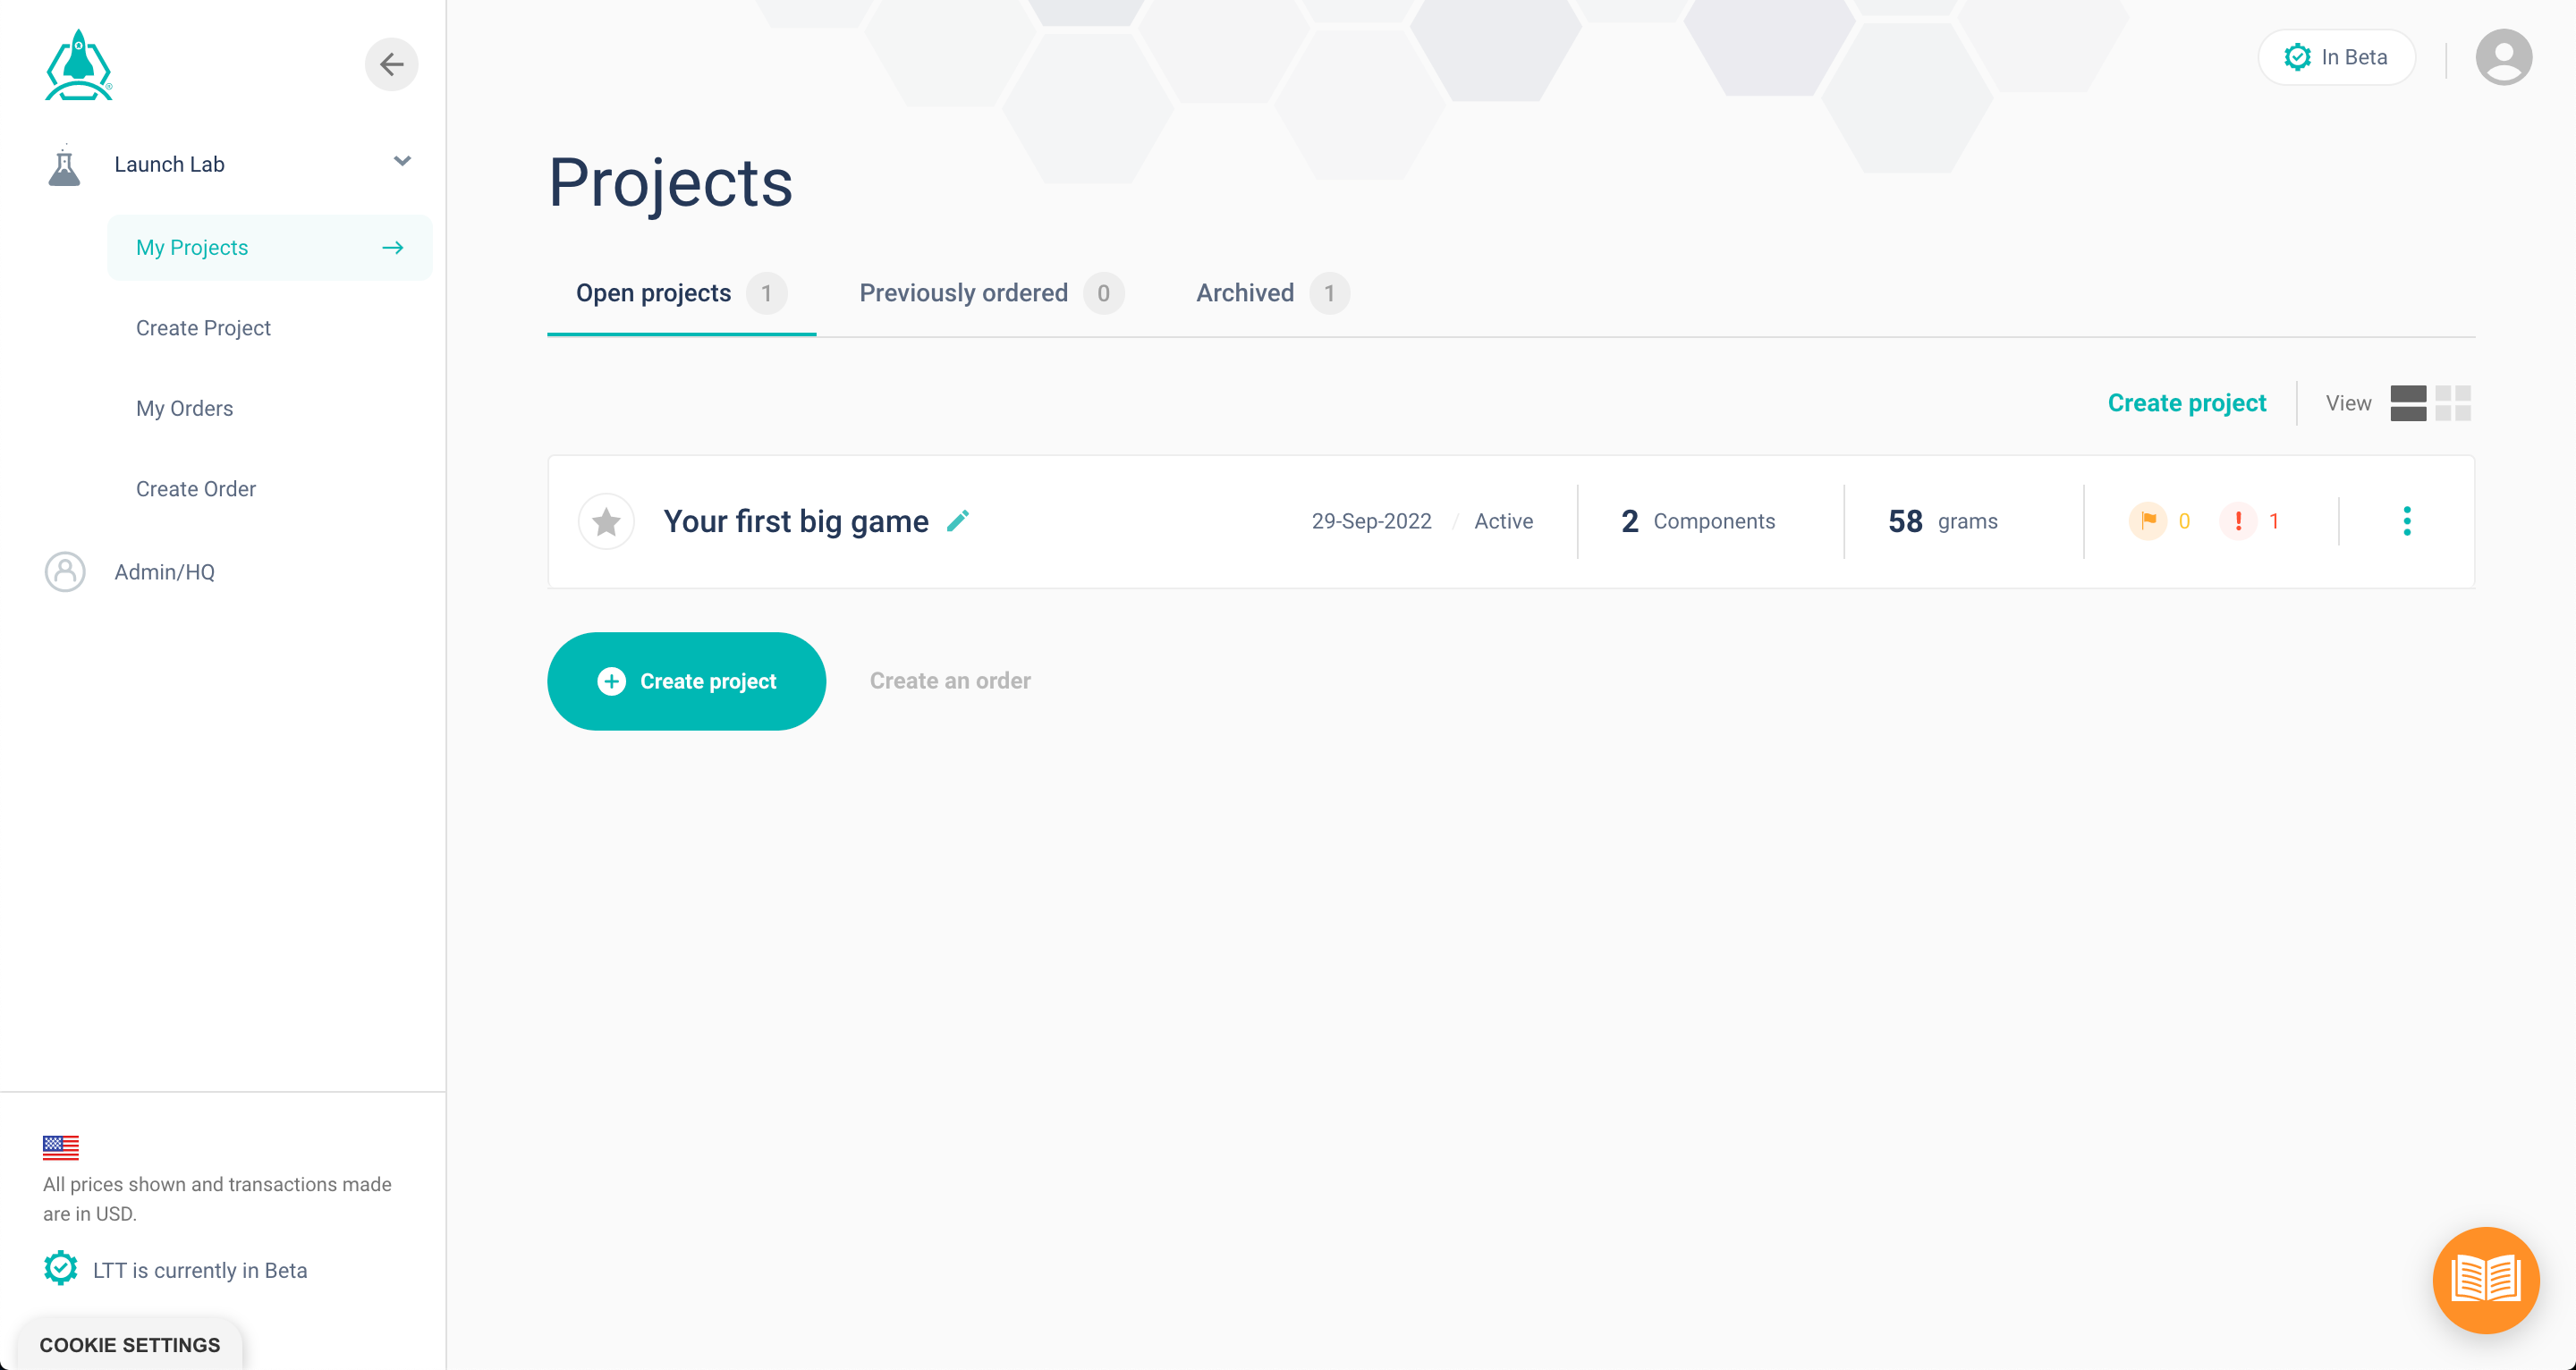 A screenshot of the My Projects screen in Launch Lab.